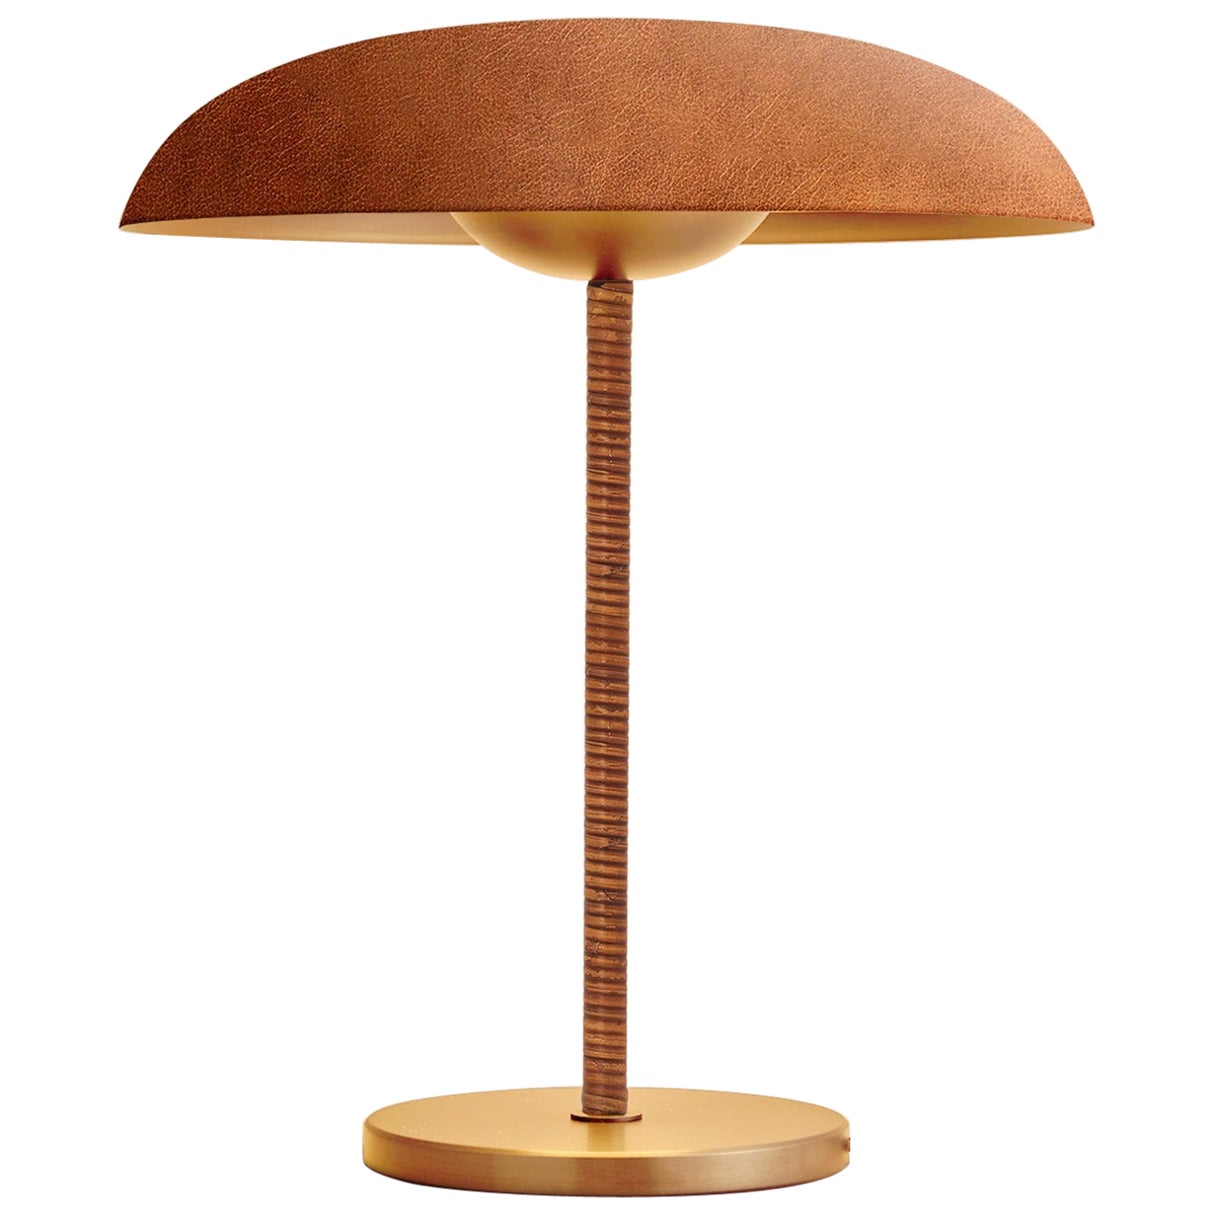 'Cosmic Solstice Caramel' Table Lamp, Handmade Leather Wrapped Brass Table Light